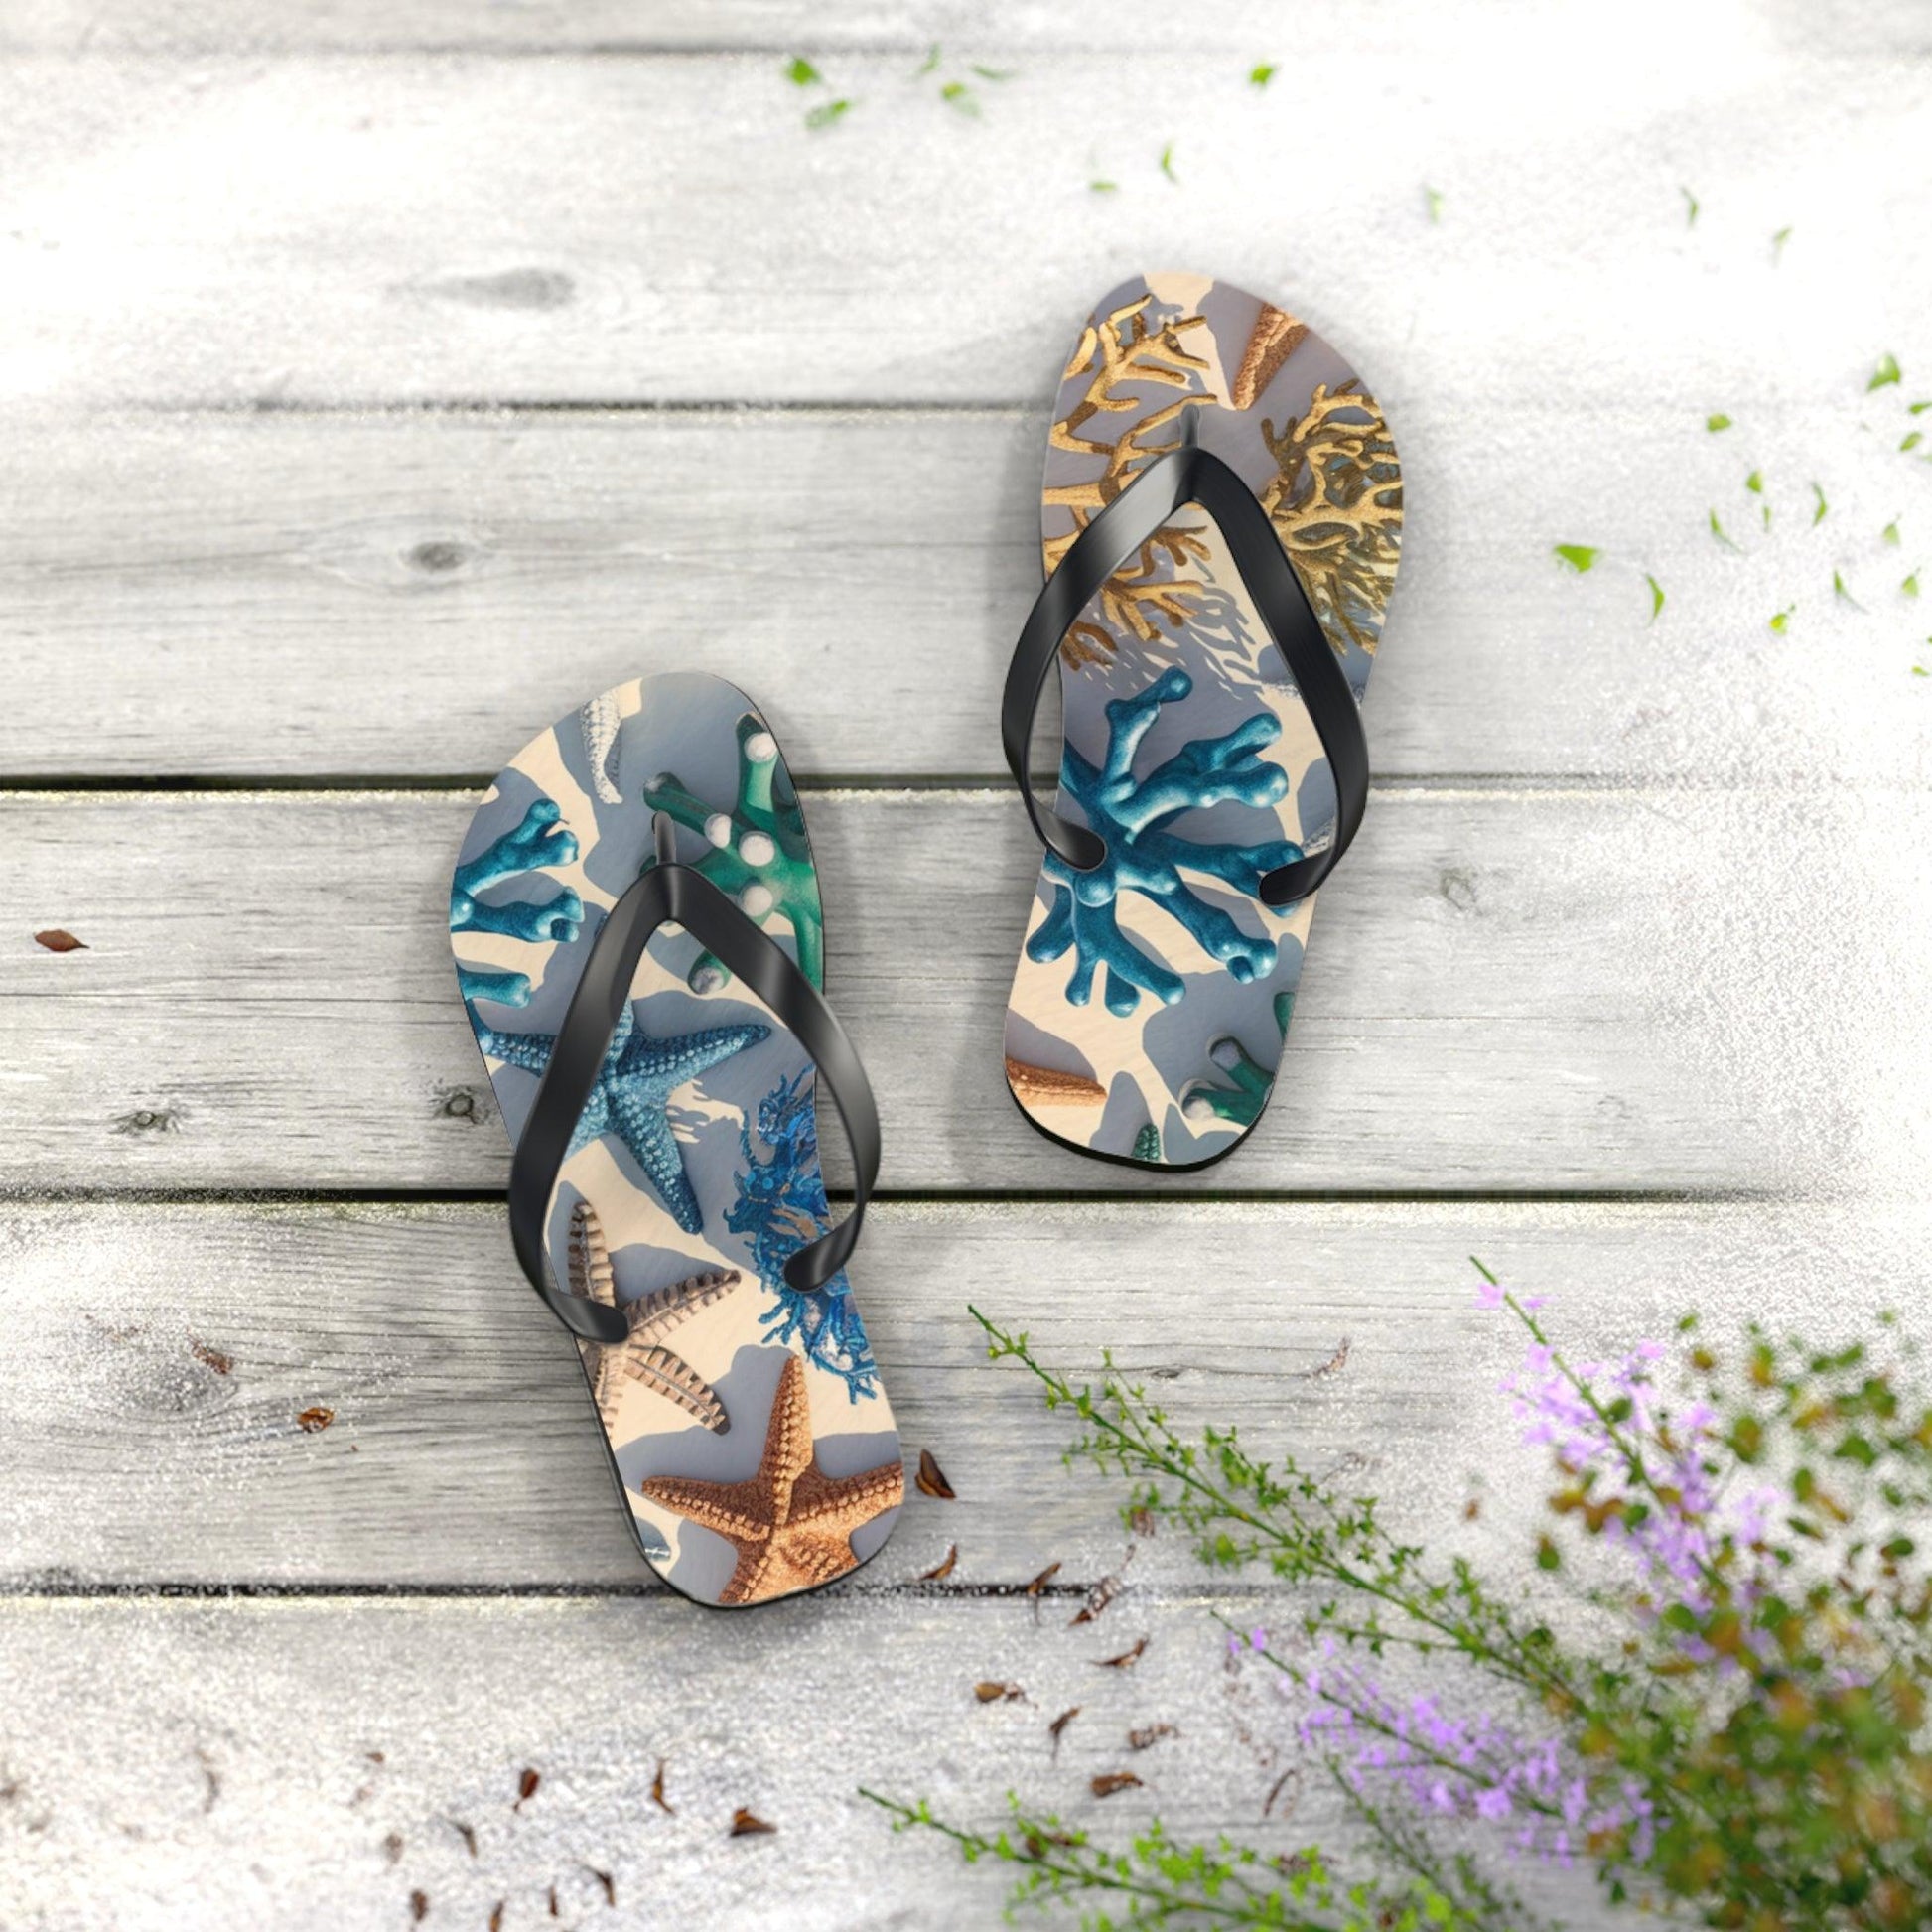 Starfish and Coral Inspired Flip Flops, Express Your Beach Loving Self - Coastal Collections